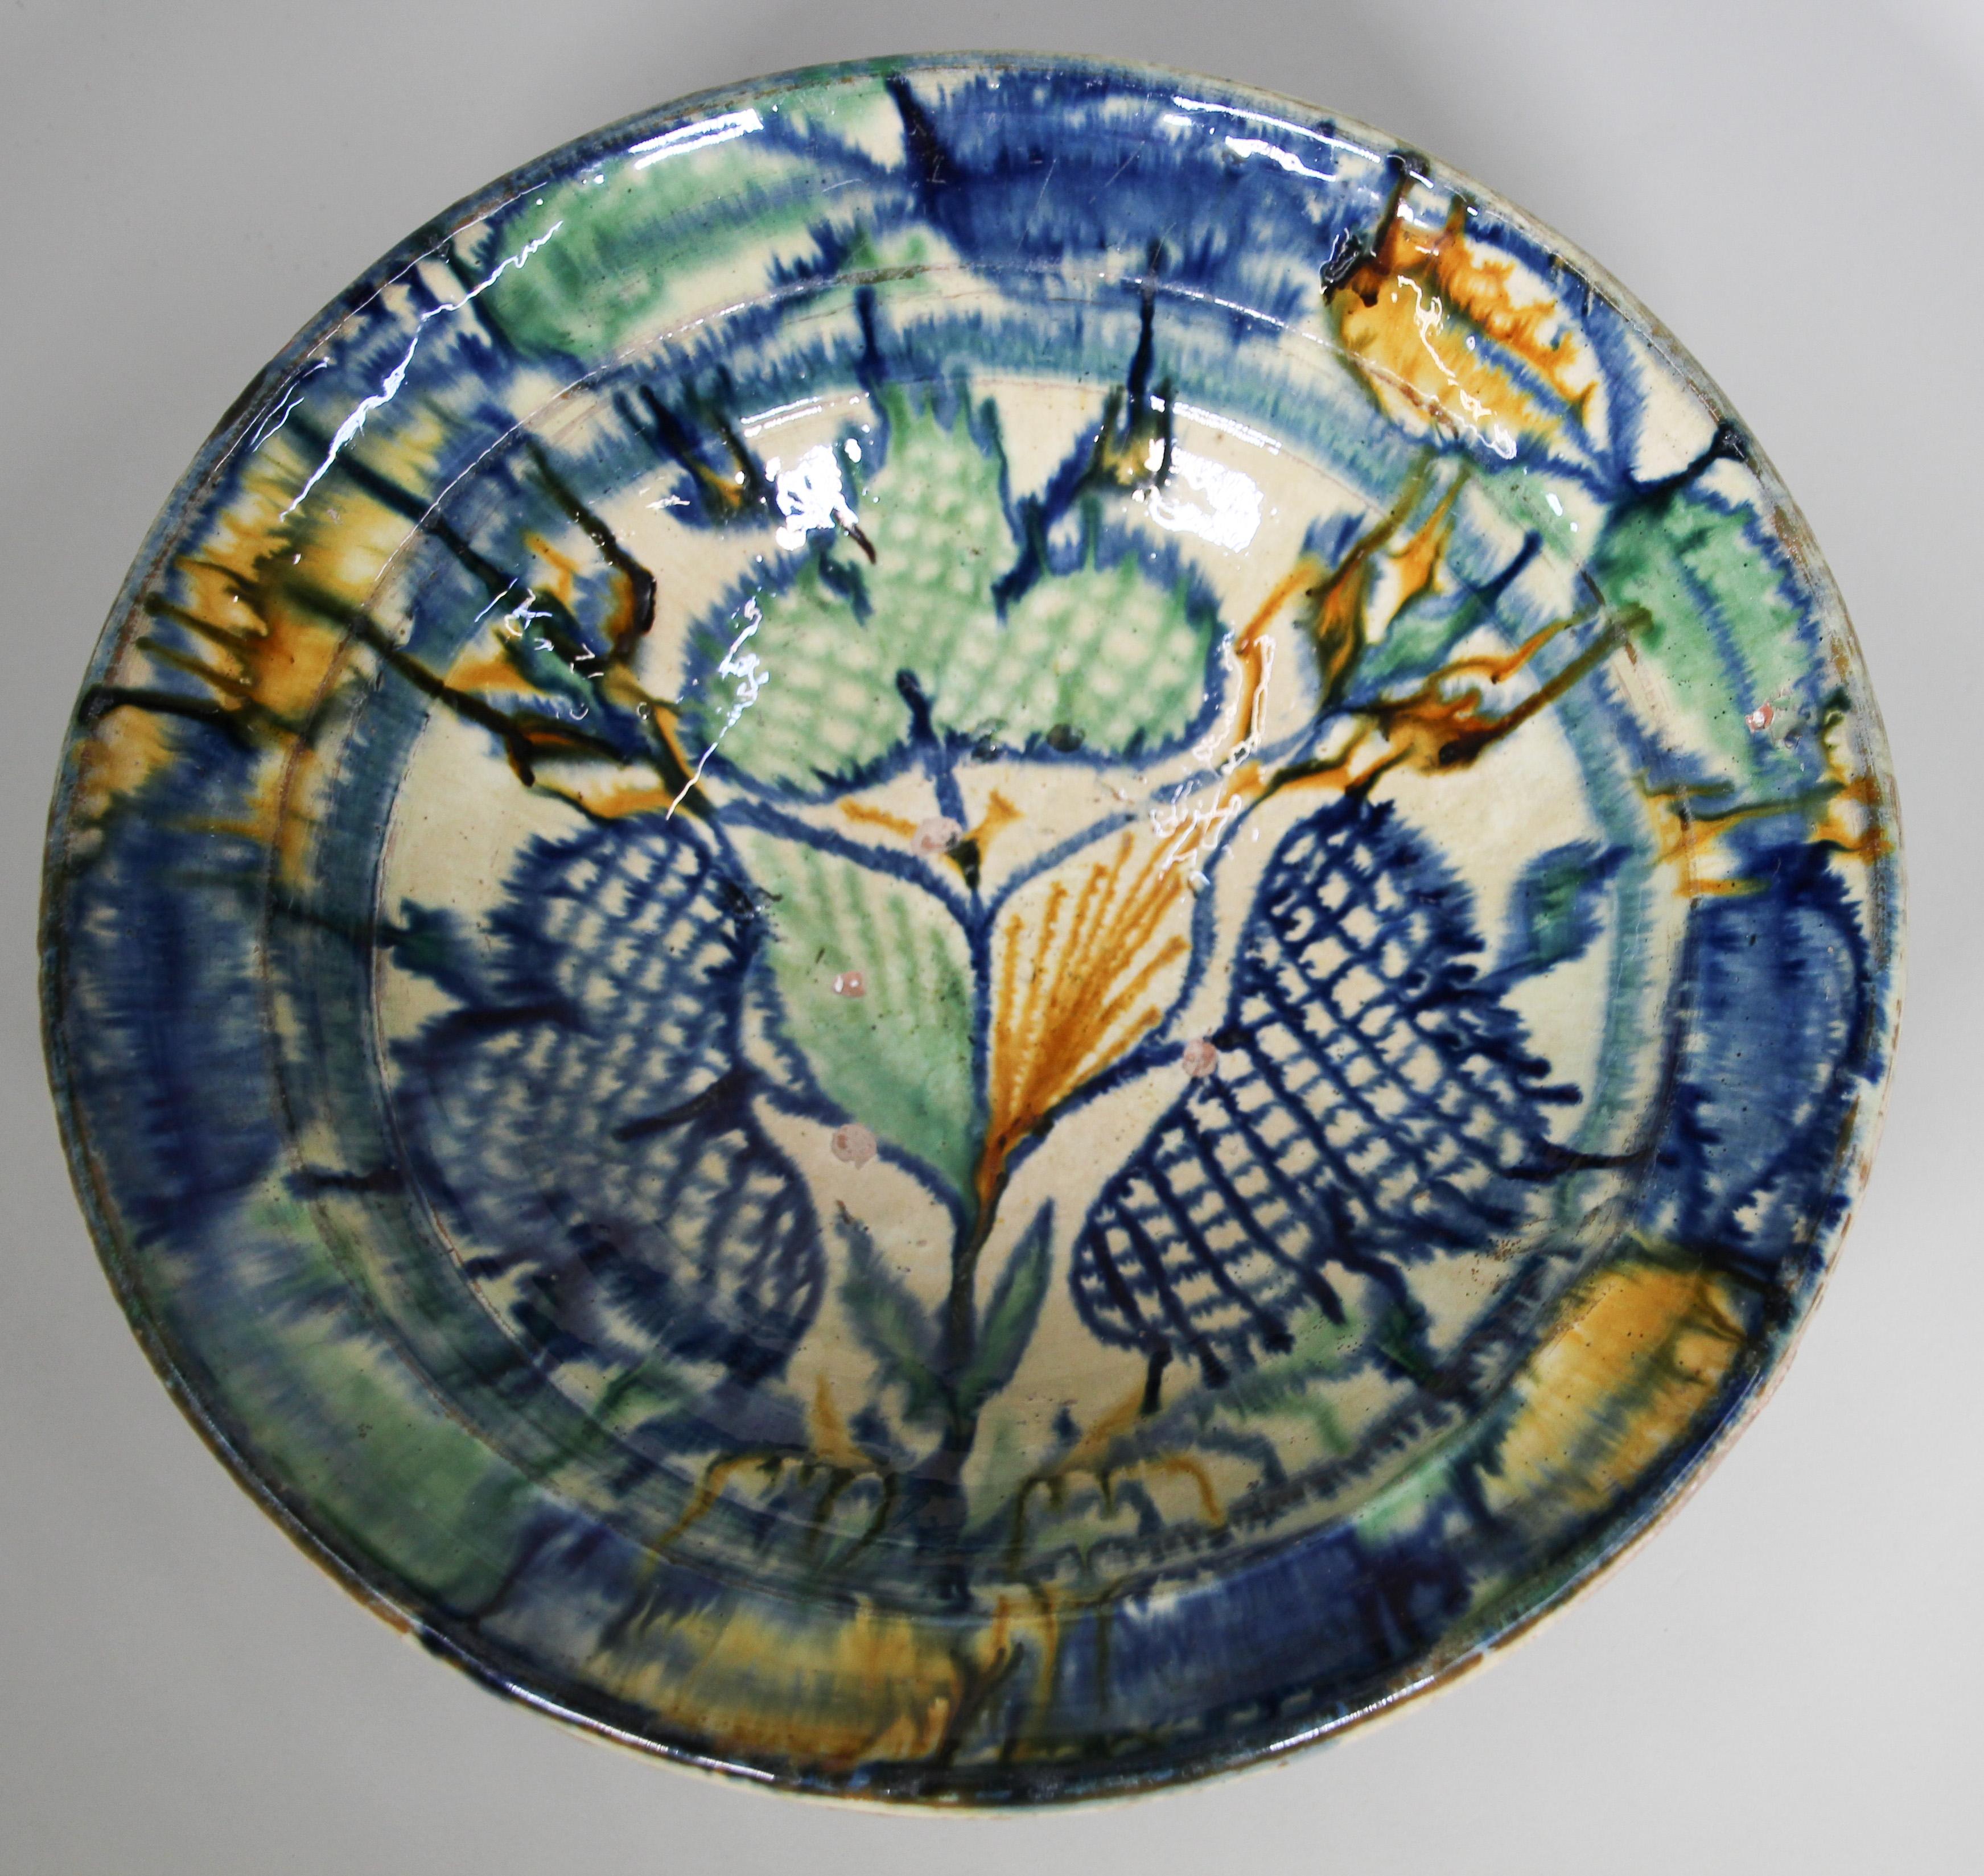 Glazed Mauresque Spanish Talavera pottery bowl ware.
Hispano-Moresque earthenware dish majolica in polychrome Moorish patterns.
Islamic pottery vessel hand painted in splashes of colors in cobalt blue, saffron yellow and teal floral decoration, very